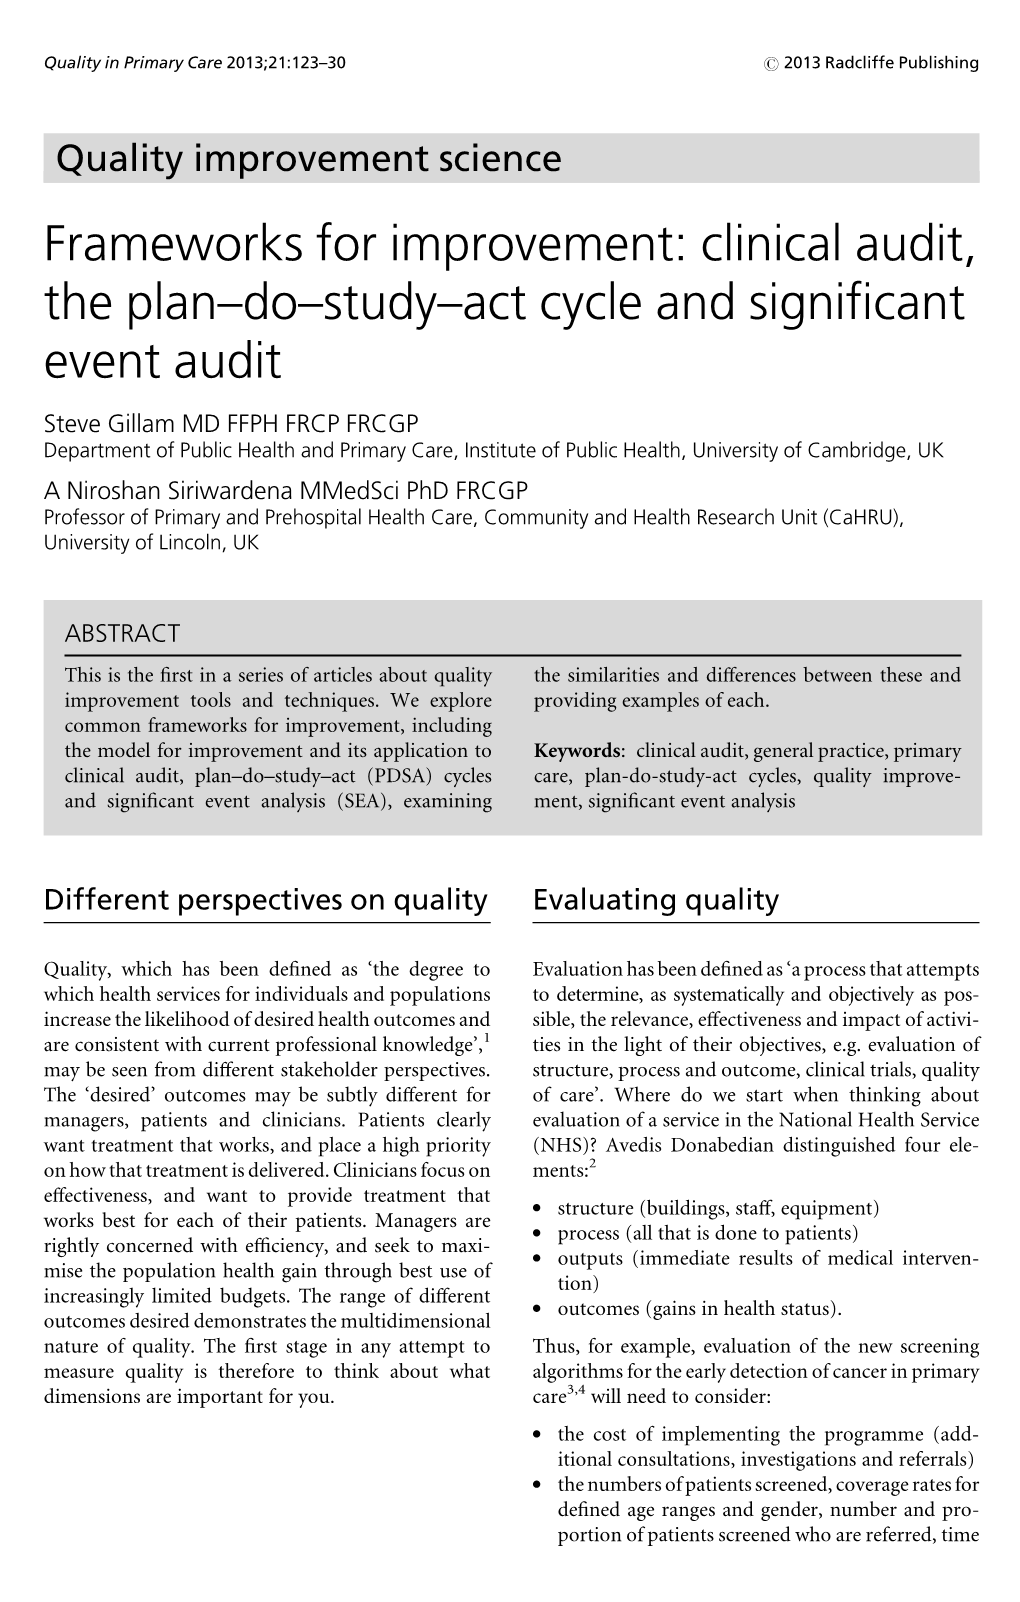 Clinical Audit, the Plan–Do–Study–Act Cycle and Significant Event Audit